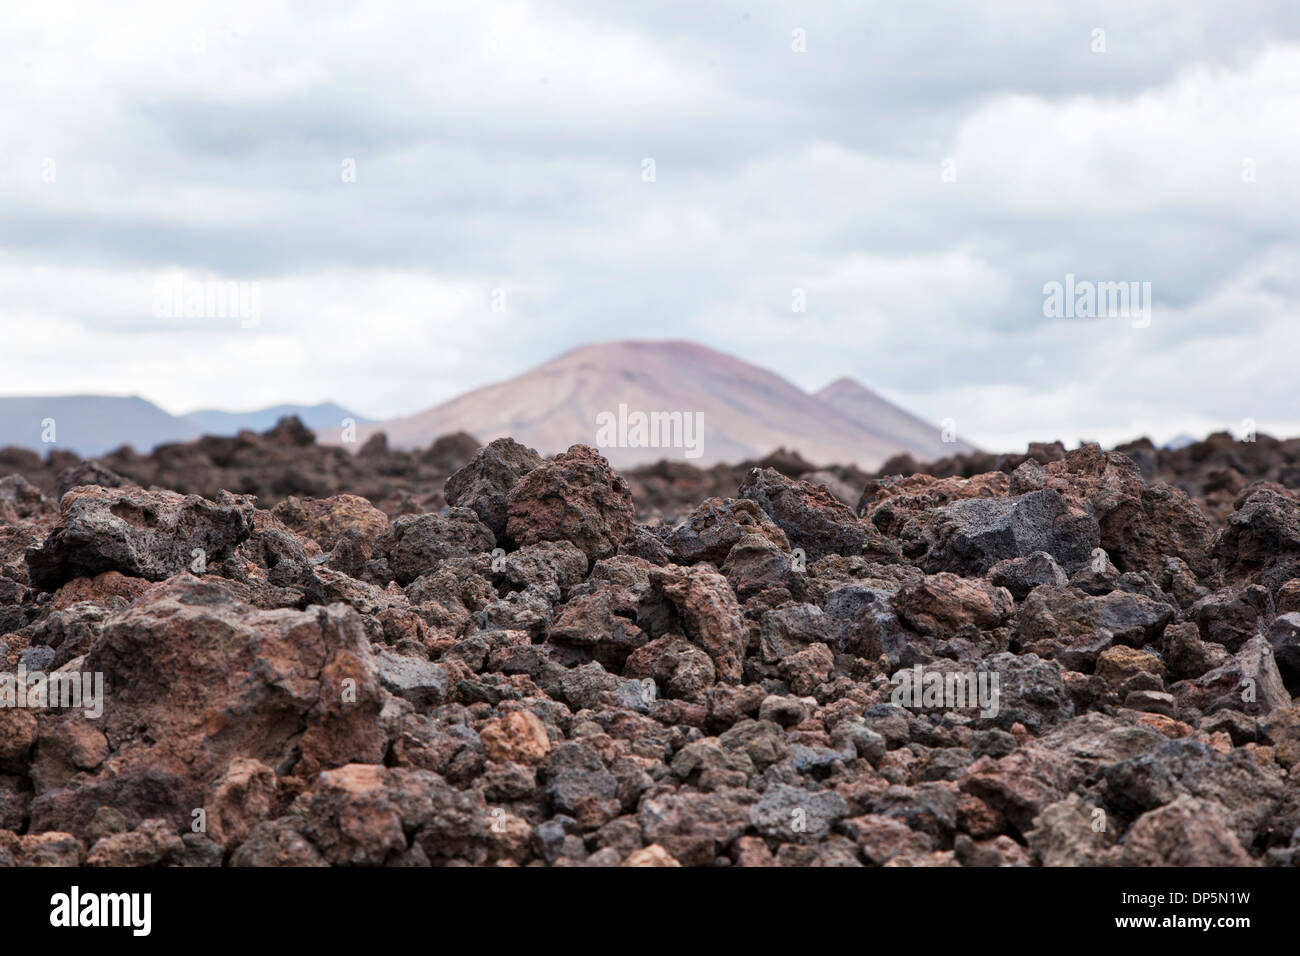 Volcanic landscape at Tenerife, Canary Islands (Spain) Stock Photo